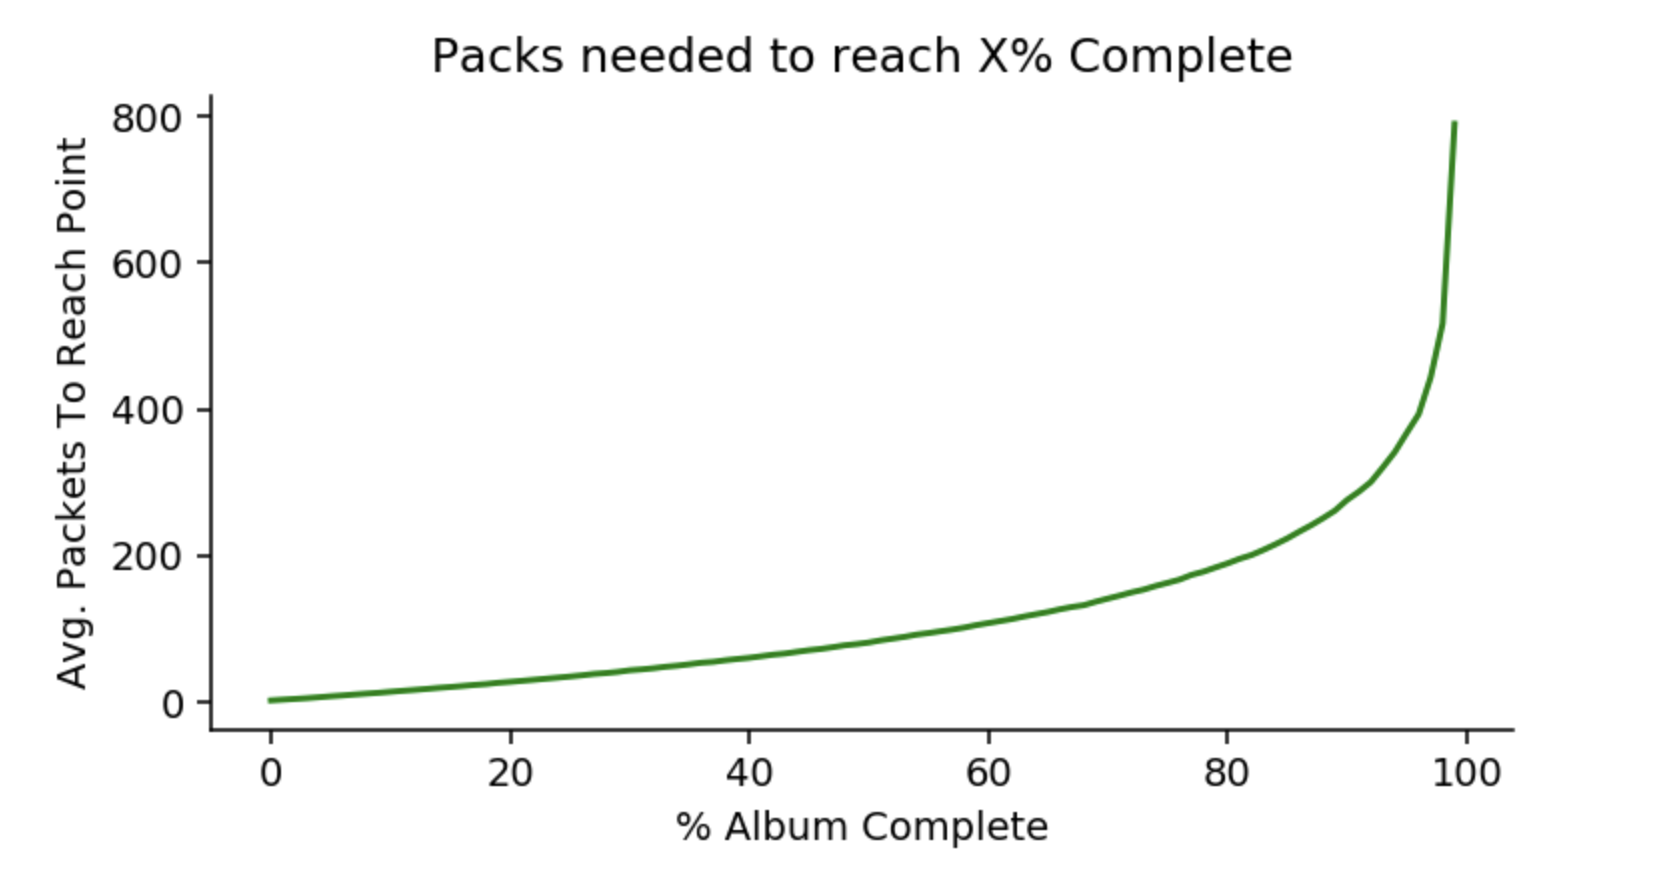 Packs needed to complete Panini percentage